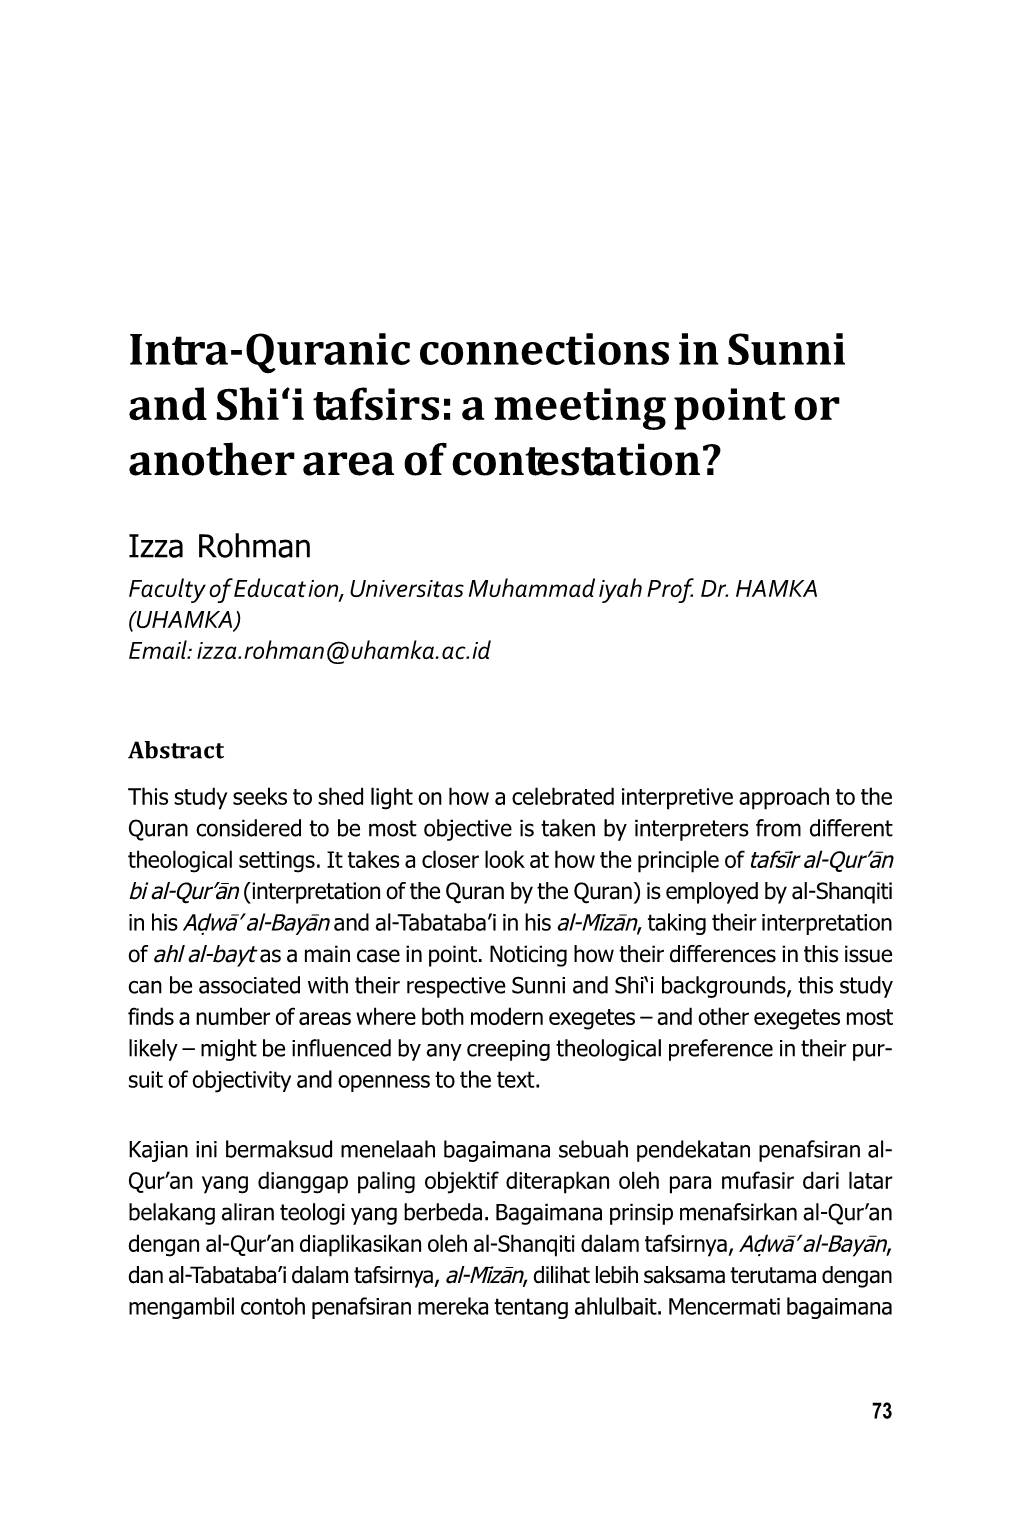 Intra-Quranic Connections in Sunni and Shi'i Tafsirs